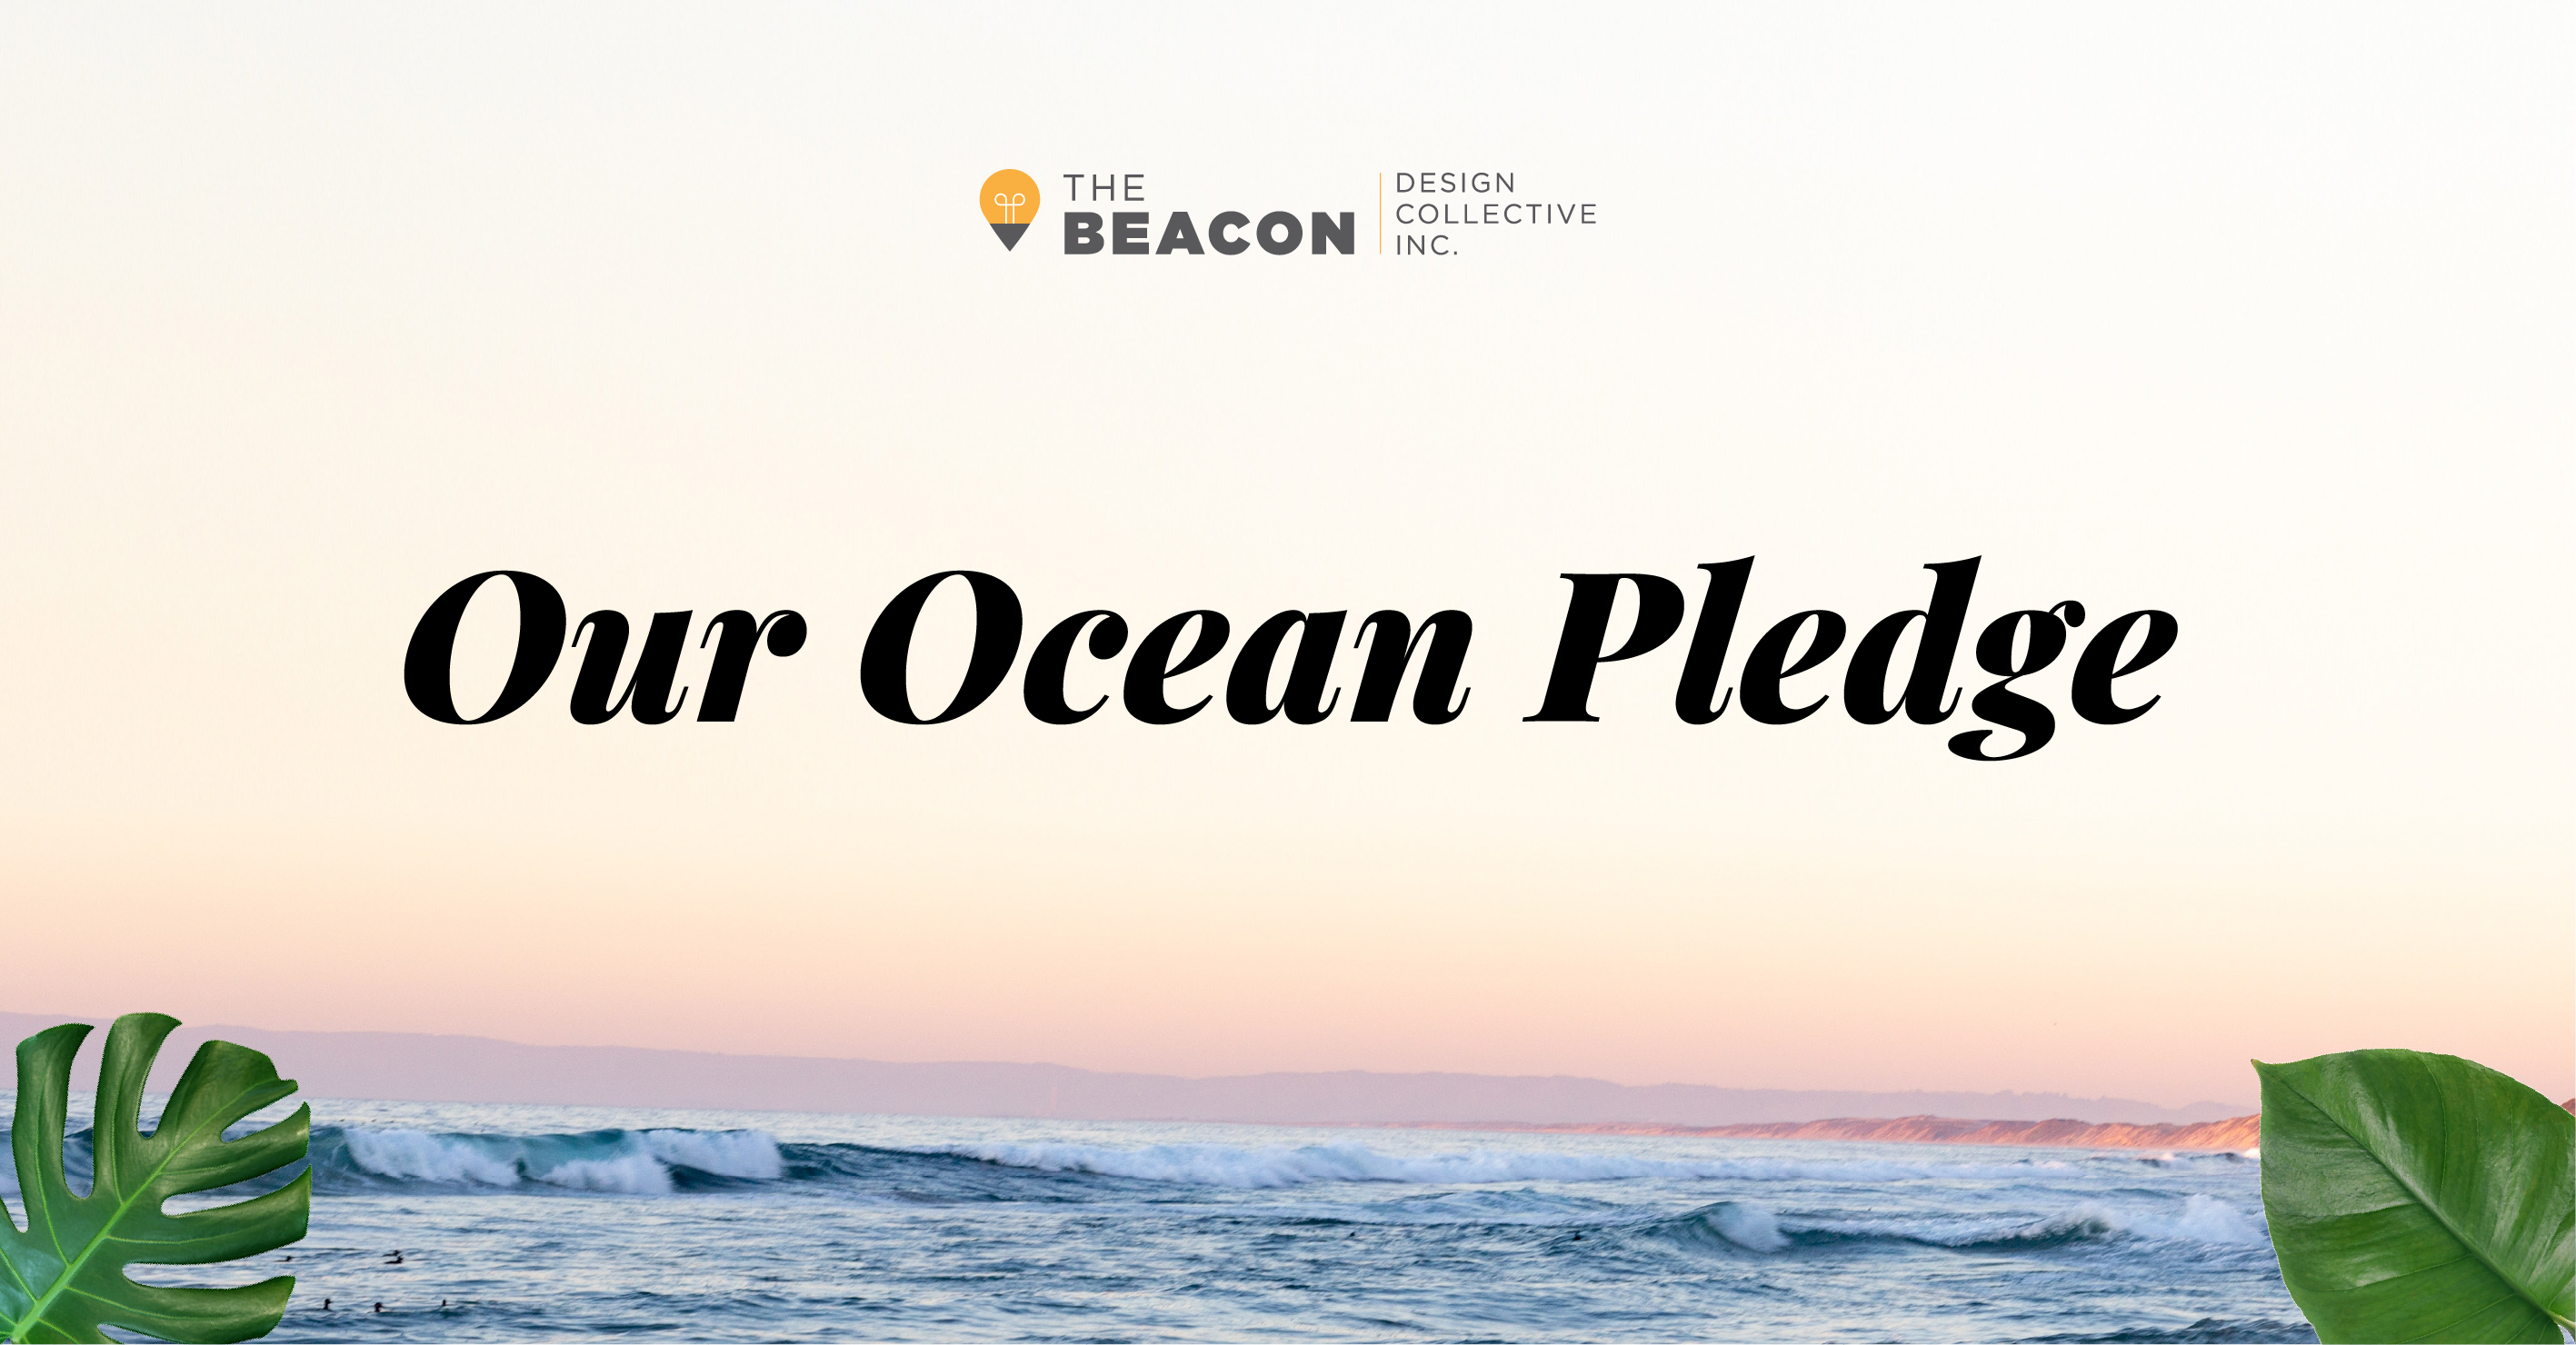 An image of ocean with ocean pledge for World Ocean Day written on it along with Beacon's logo.